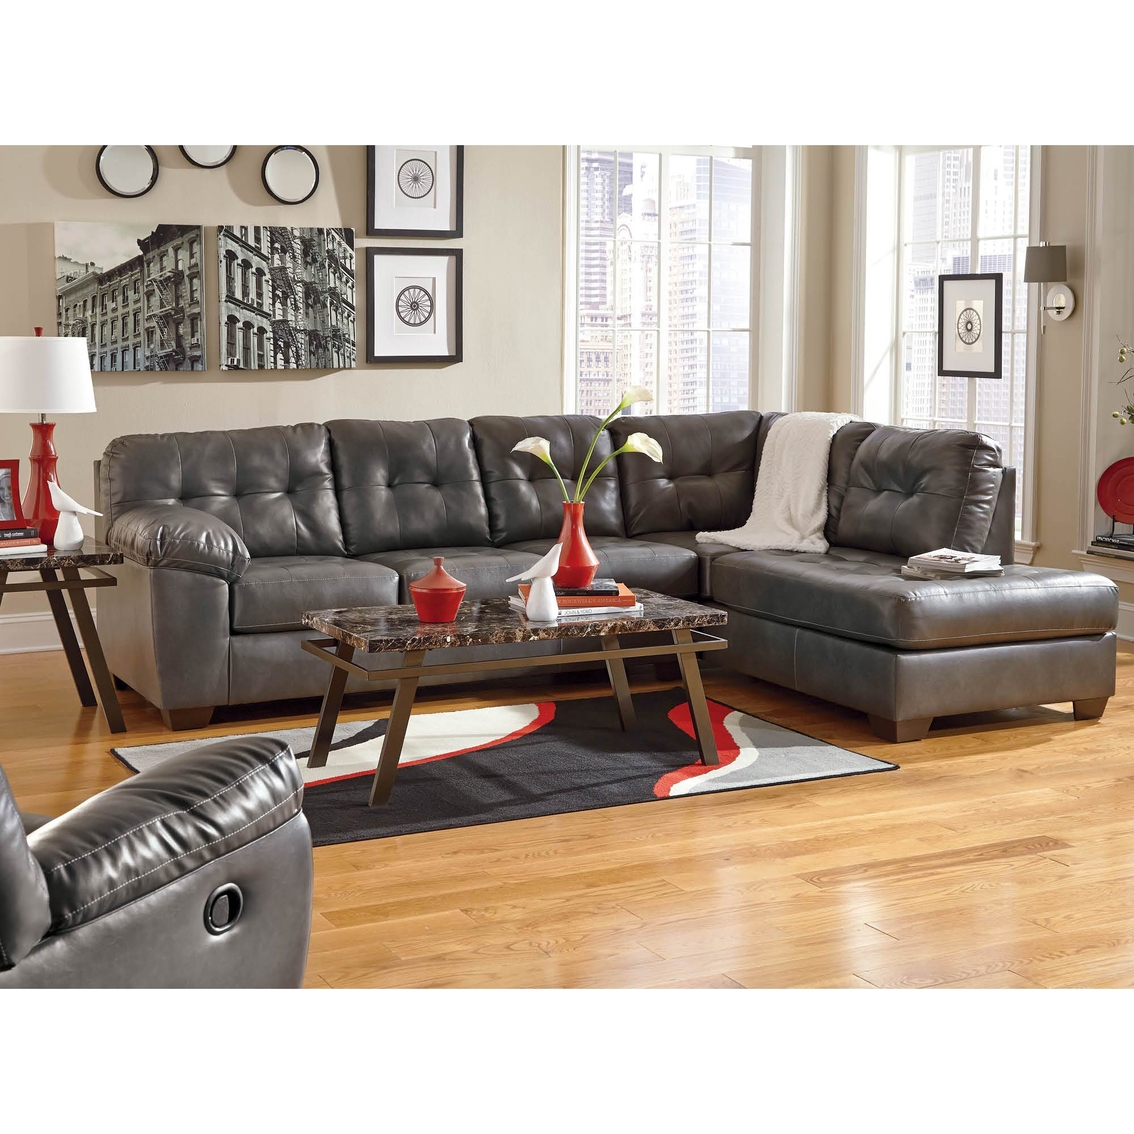 Signature Design By Ashley Alliston DuraBlend 2 Pc. Sectional RAF Chaise/LAF Sofa - Image 3 of 3